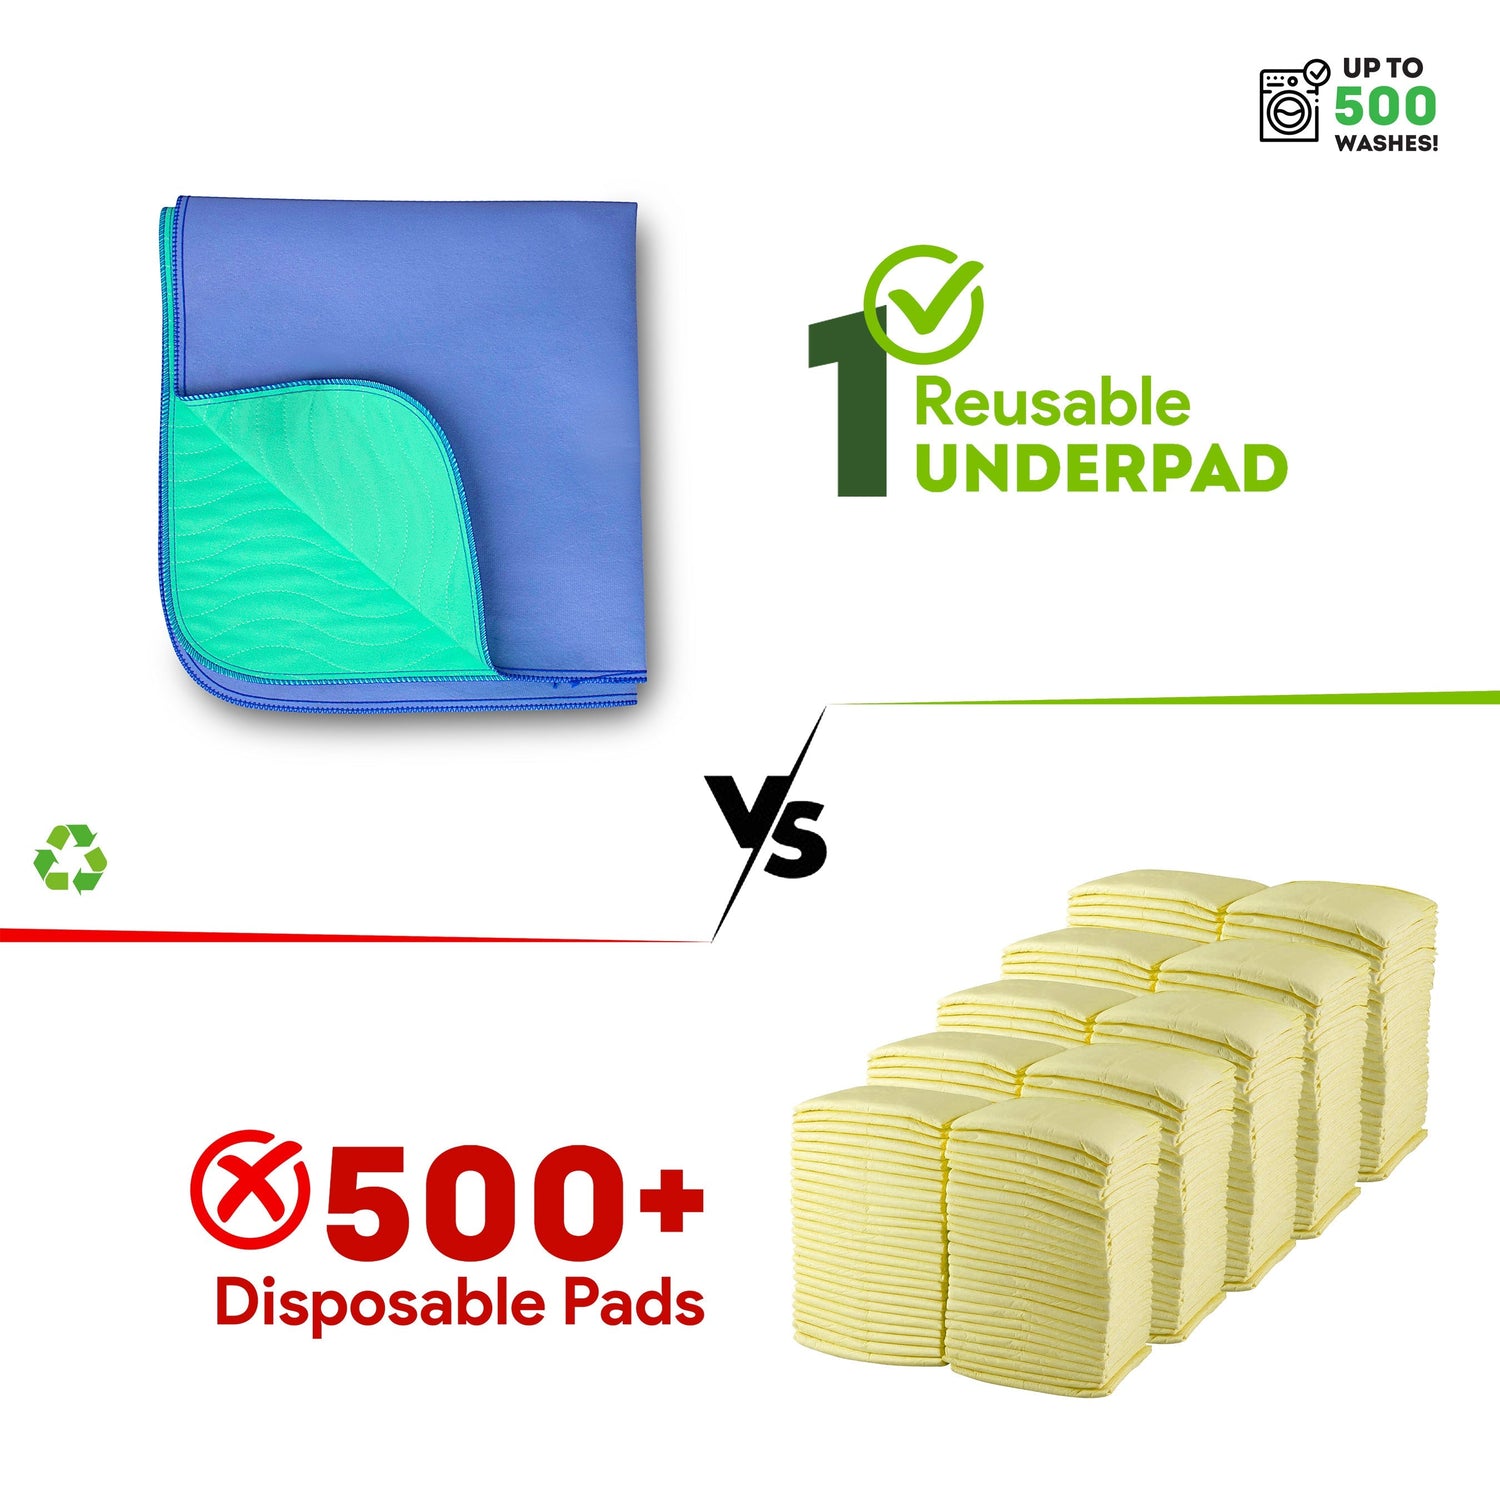 Pack of 6 Washable Underpads - 34 x 36 - Medium -Improvia Bedwetting Pad